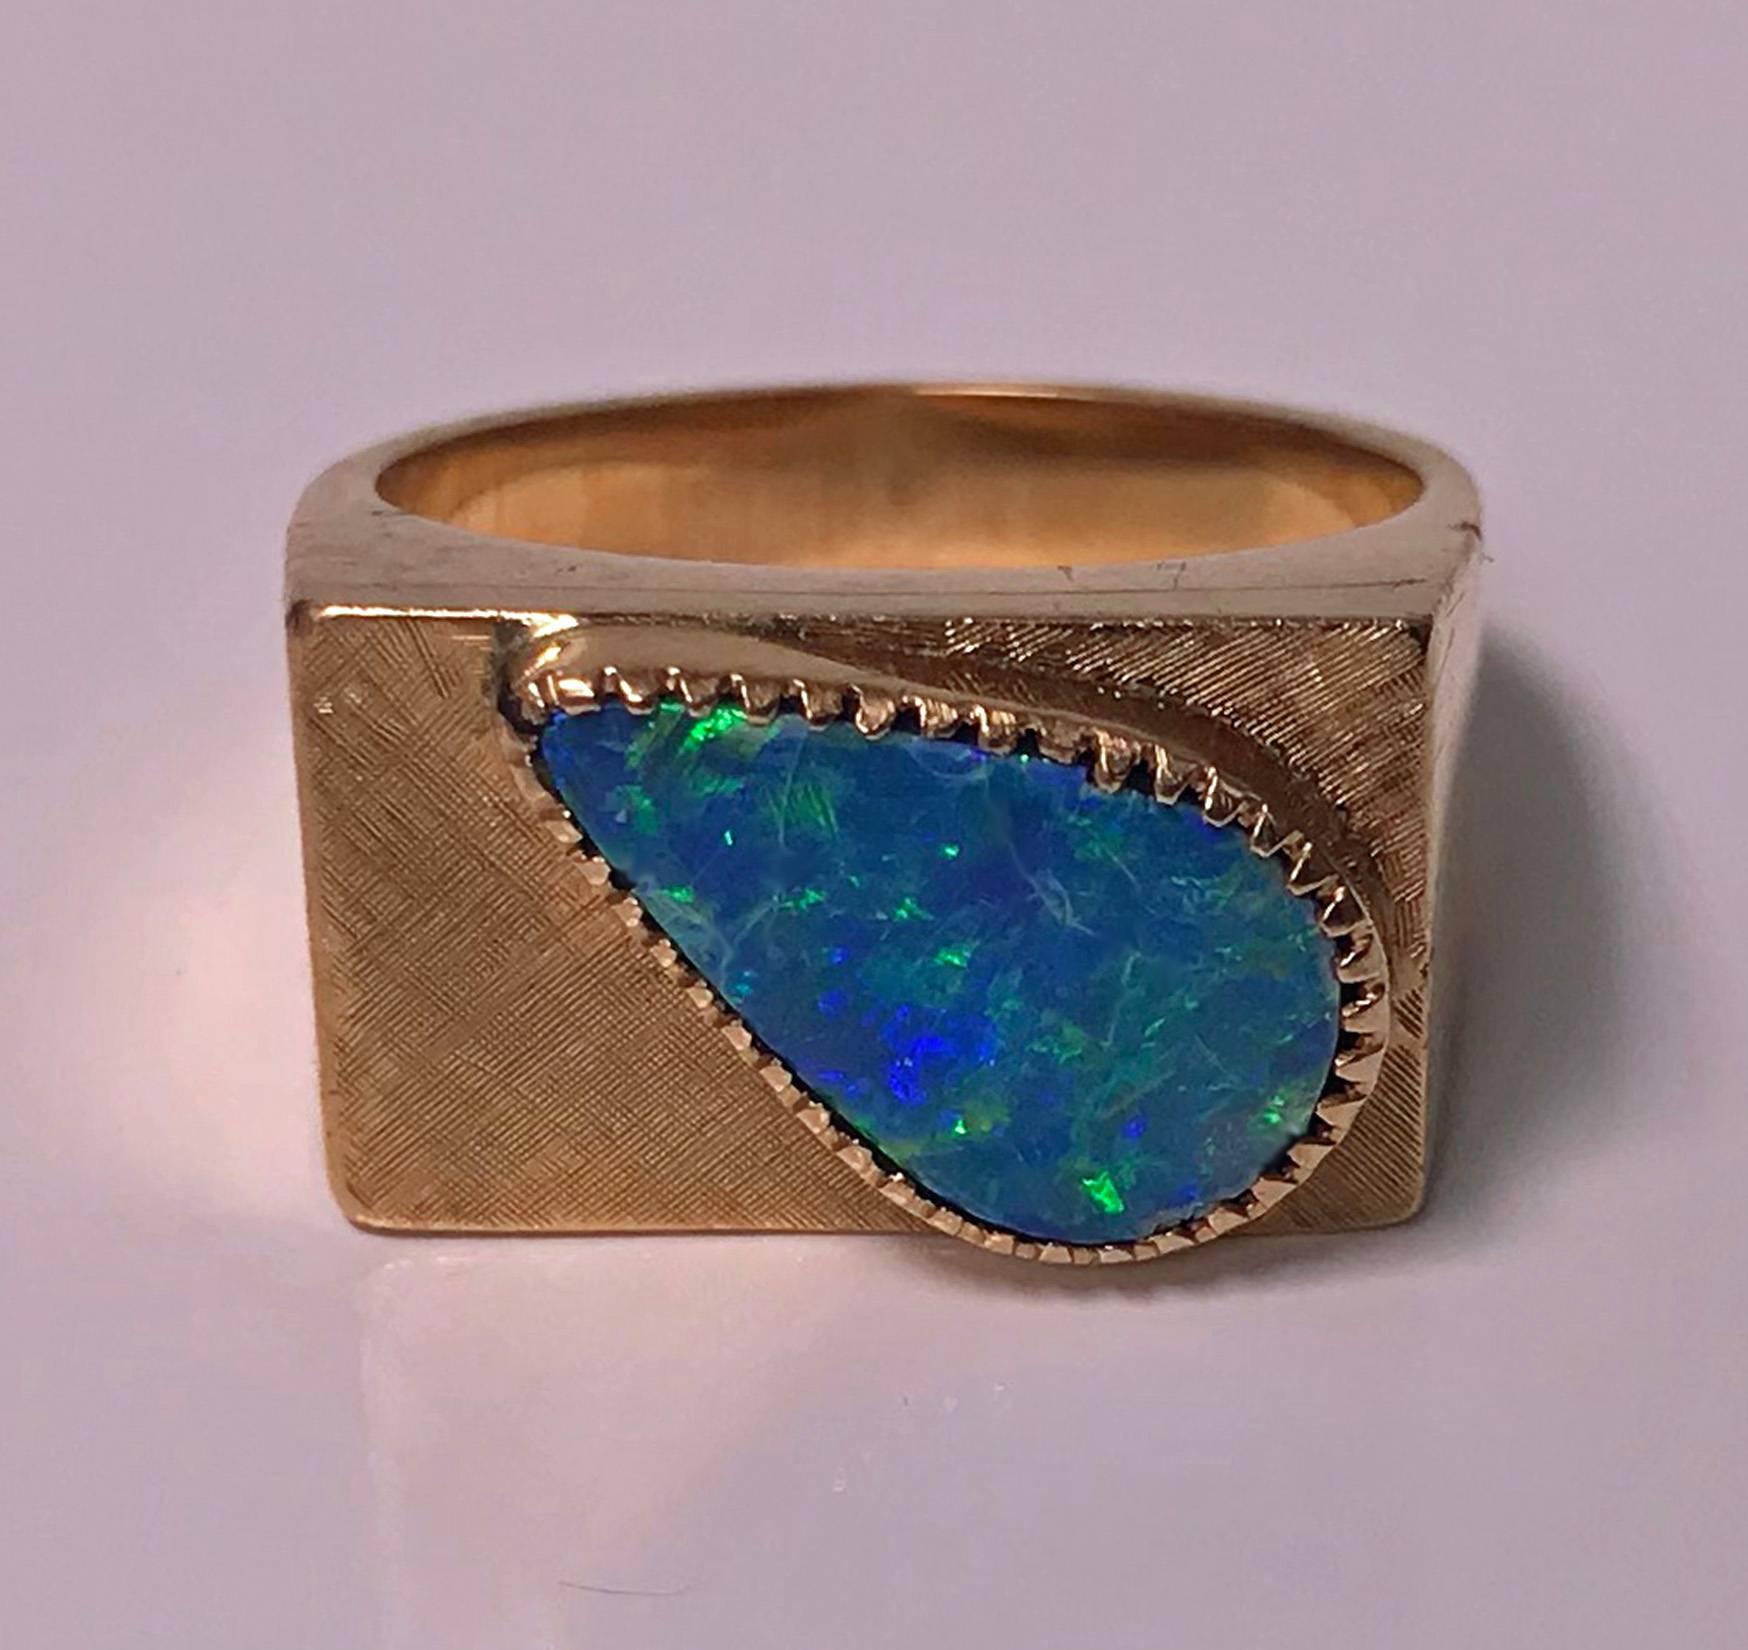 1970’s 18K Pink Gold Opal triplet Ring. The Ring set with a pear shape opal triplet, gauging 15 x 9 mm, closed back setting, bright blue and green colours. The solid 18K pink or rose gold mount with textured finish top and plain polished gold